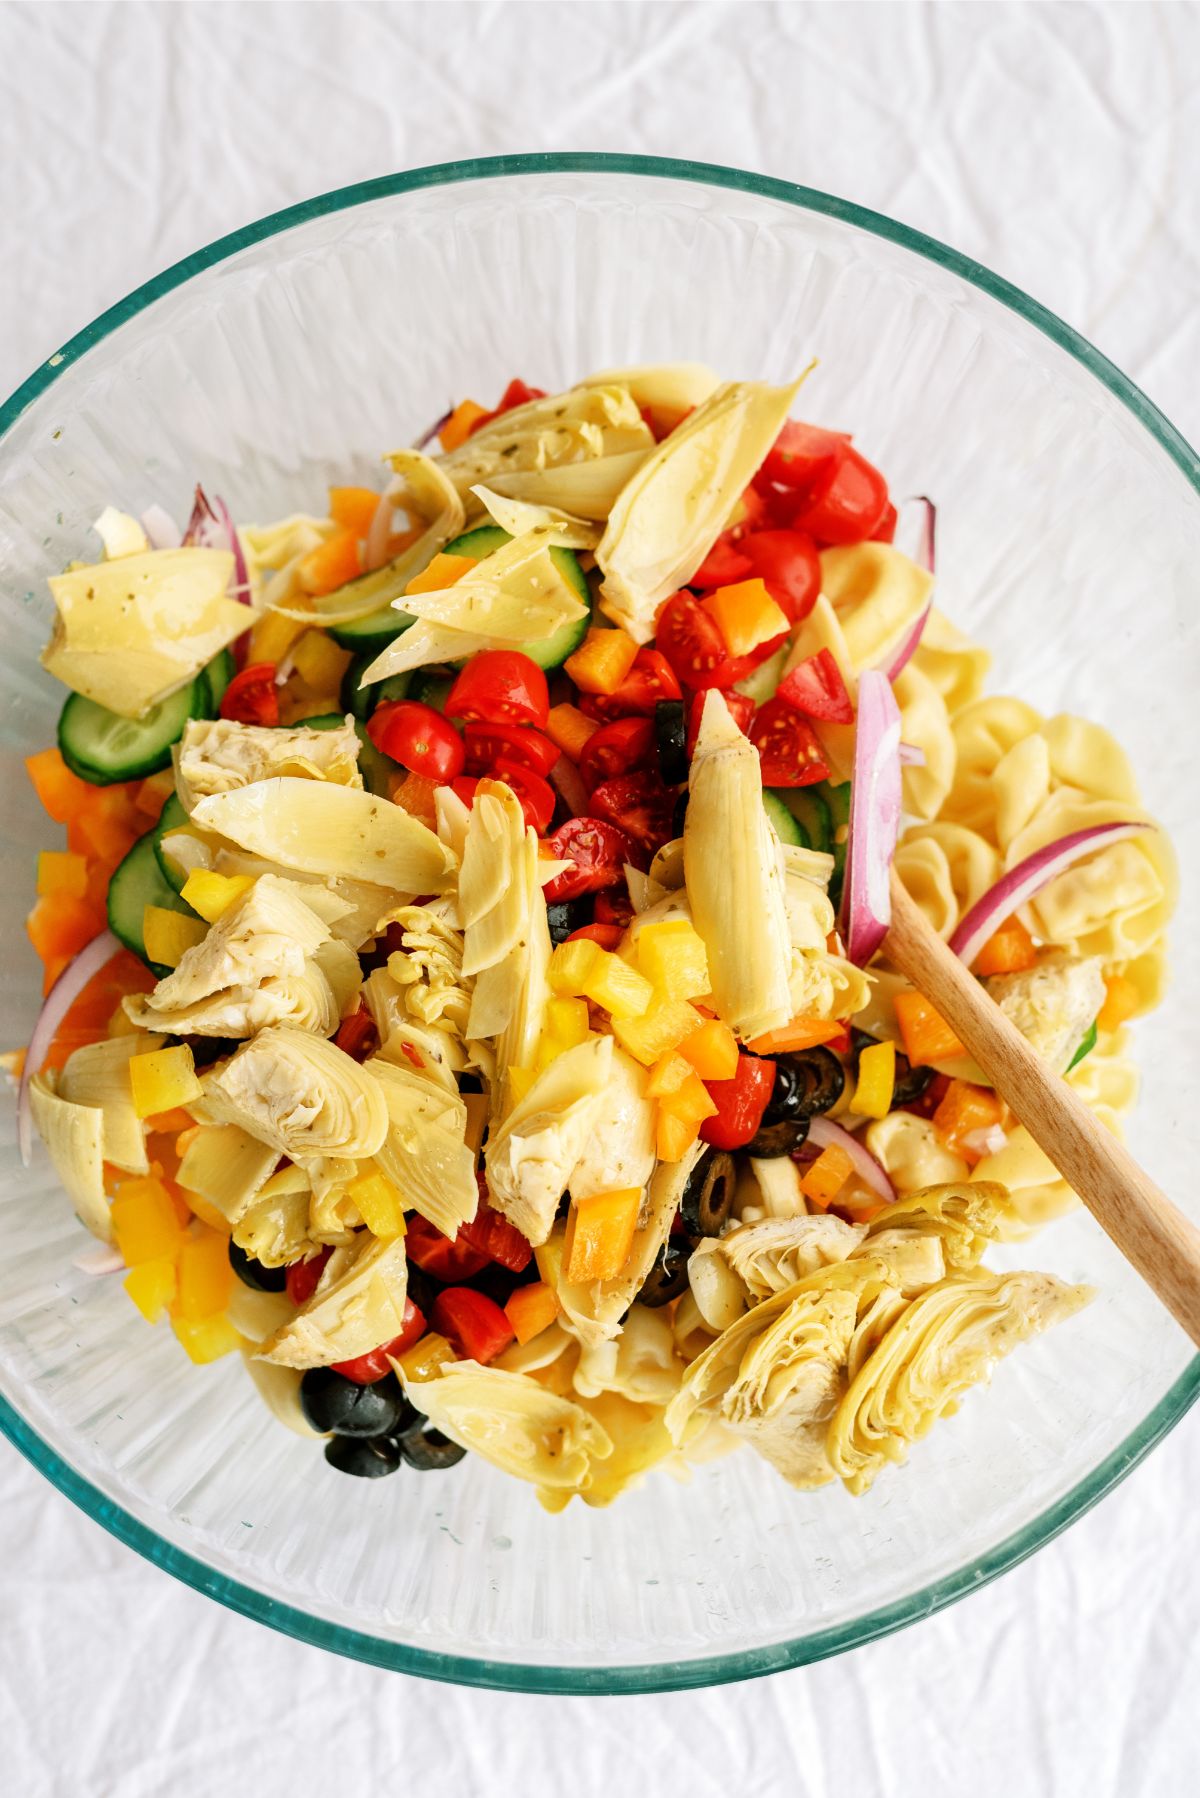 Combining ingredients for Tortellini Pasta Salad in a large bowl